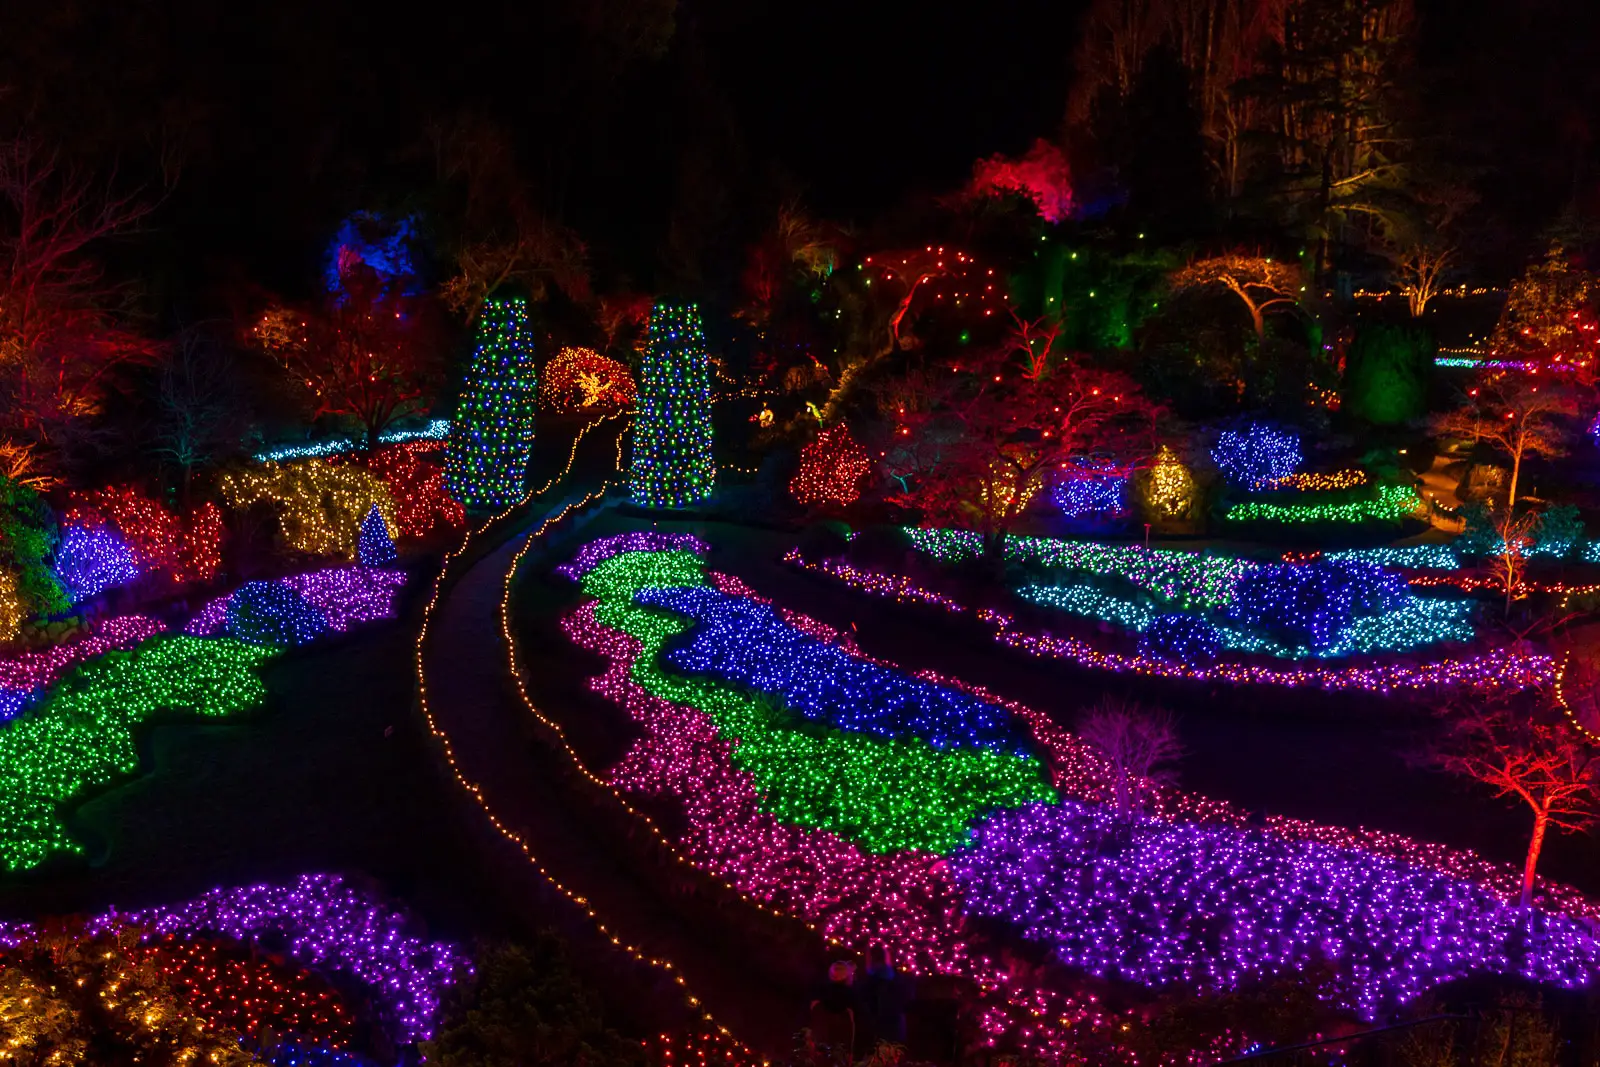 The Magic of Christmas at the Butchart Gardens in Victoria, BC